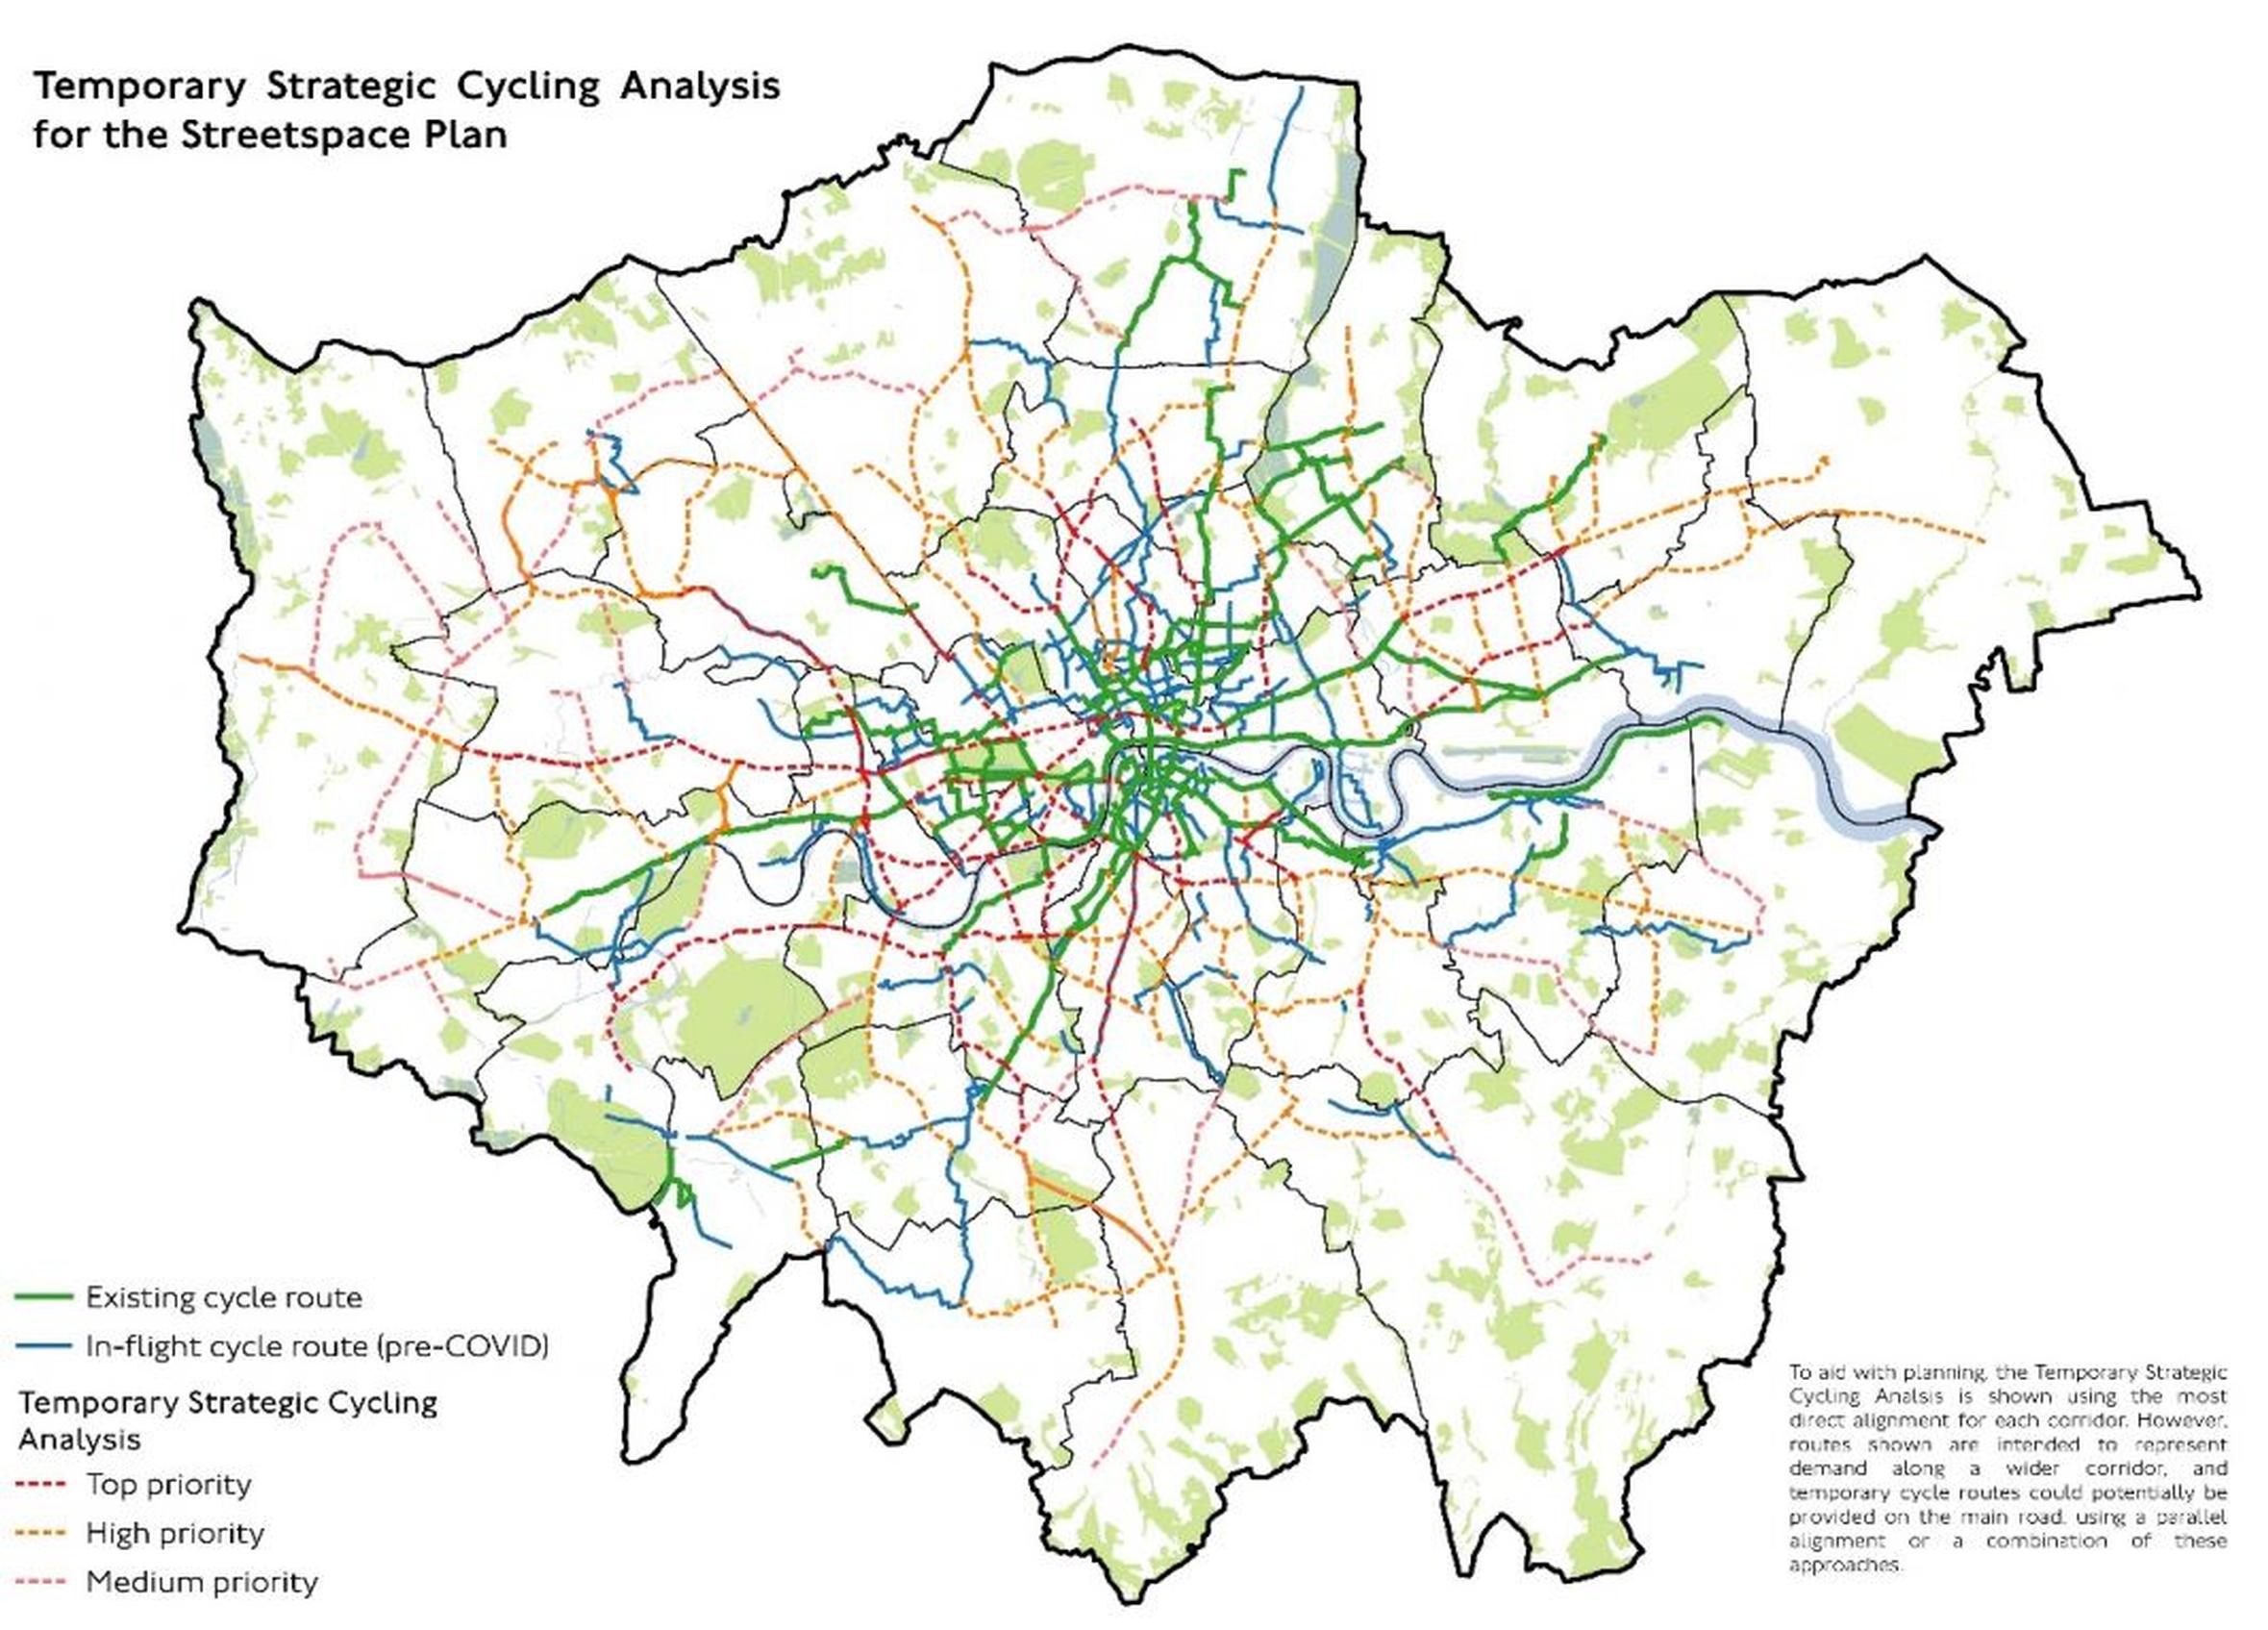 Figure 1: Temporary Strategic Cycling Analysis for Streetspace Plan 2020. Spider diagram routes are focussed on trips into and out of the city centre. Source: Appendix Four Analysis for the Temporary Strategic Cycling Analysis v1, TfL